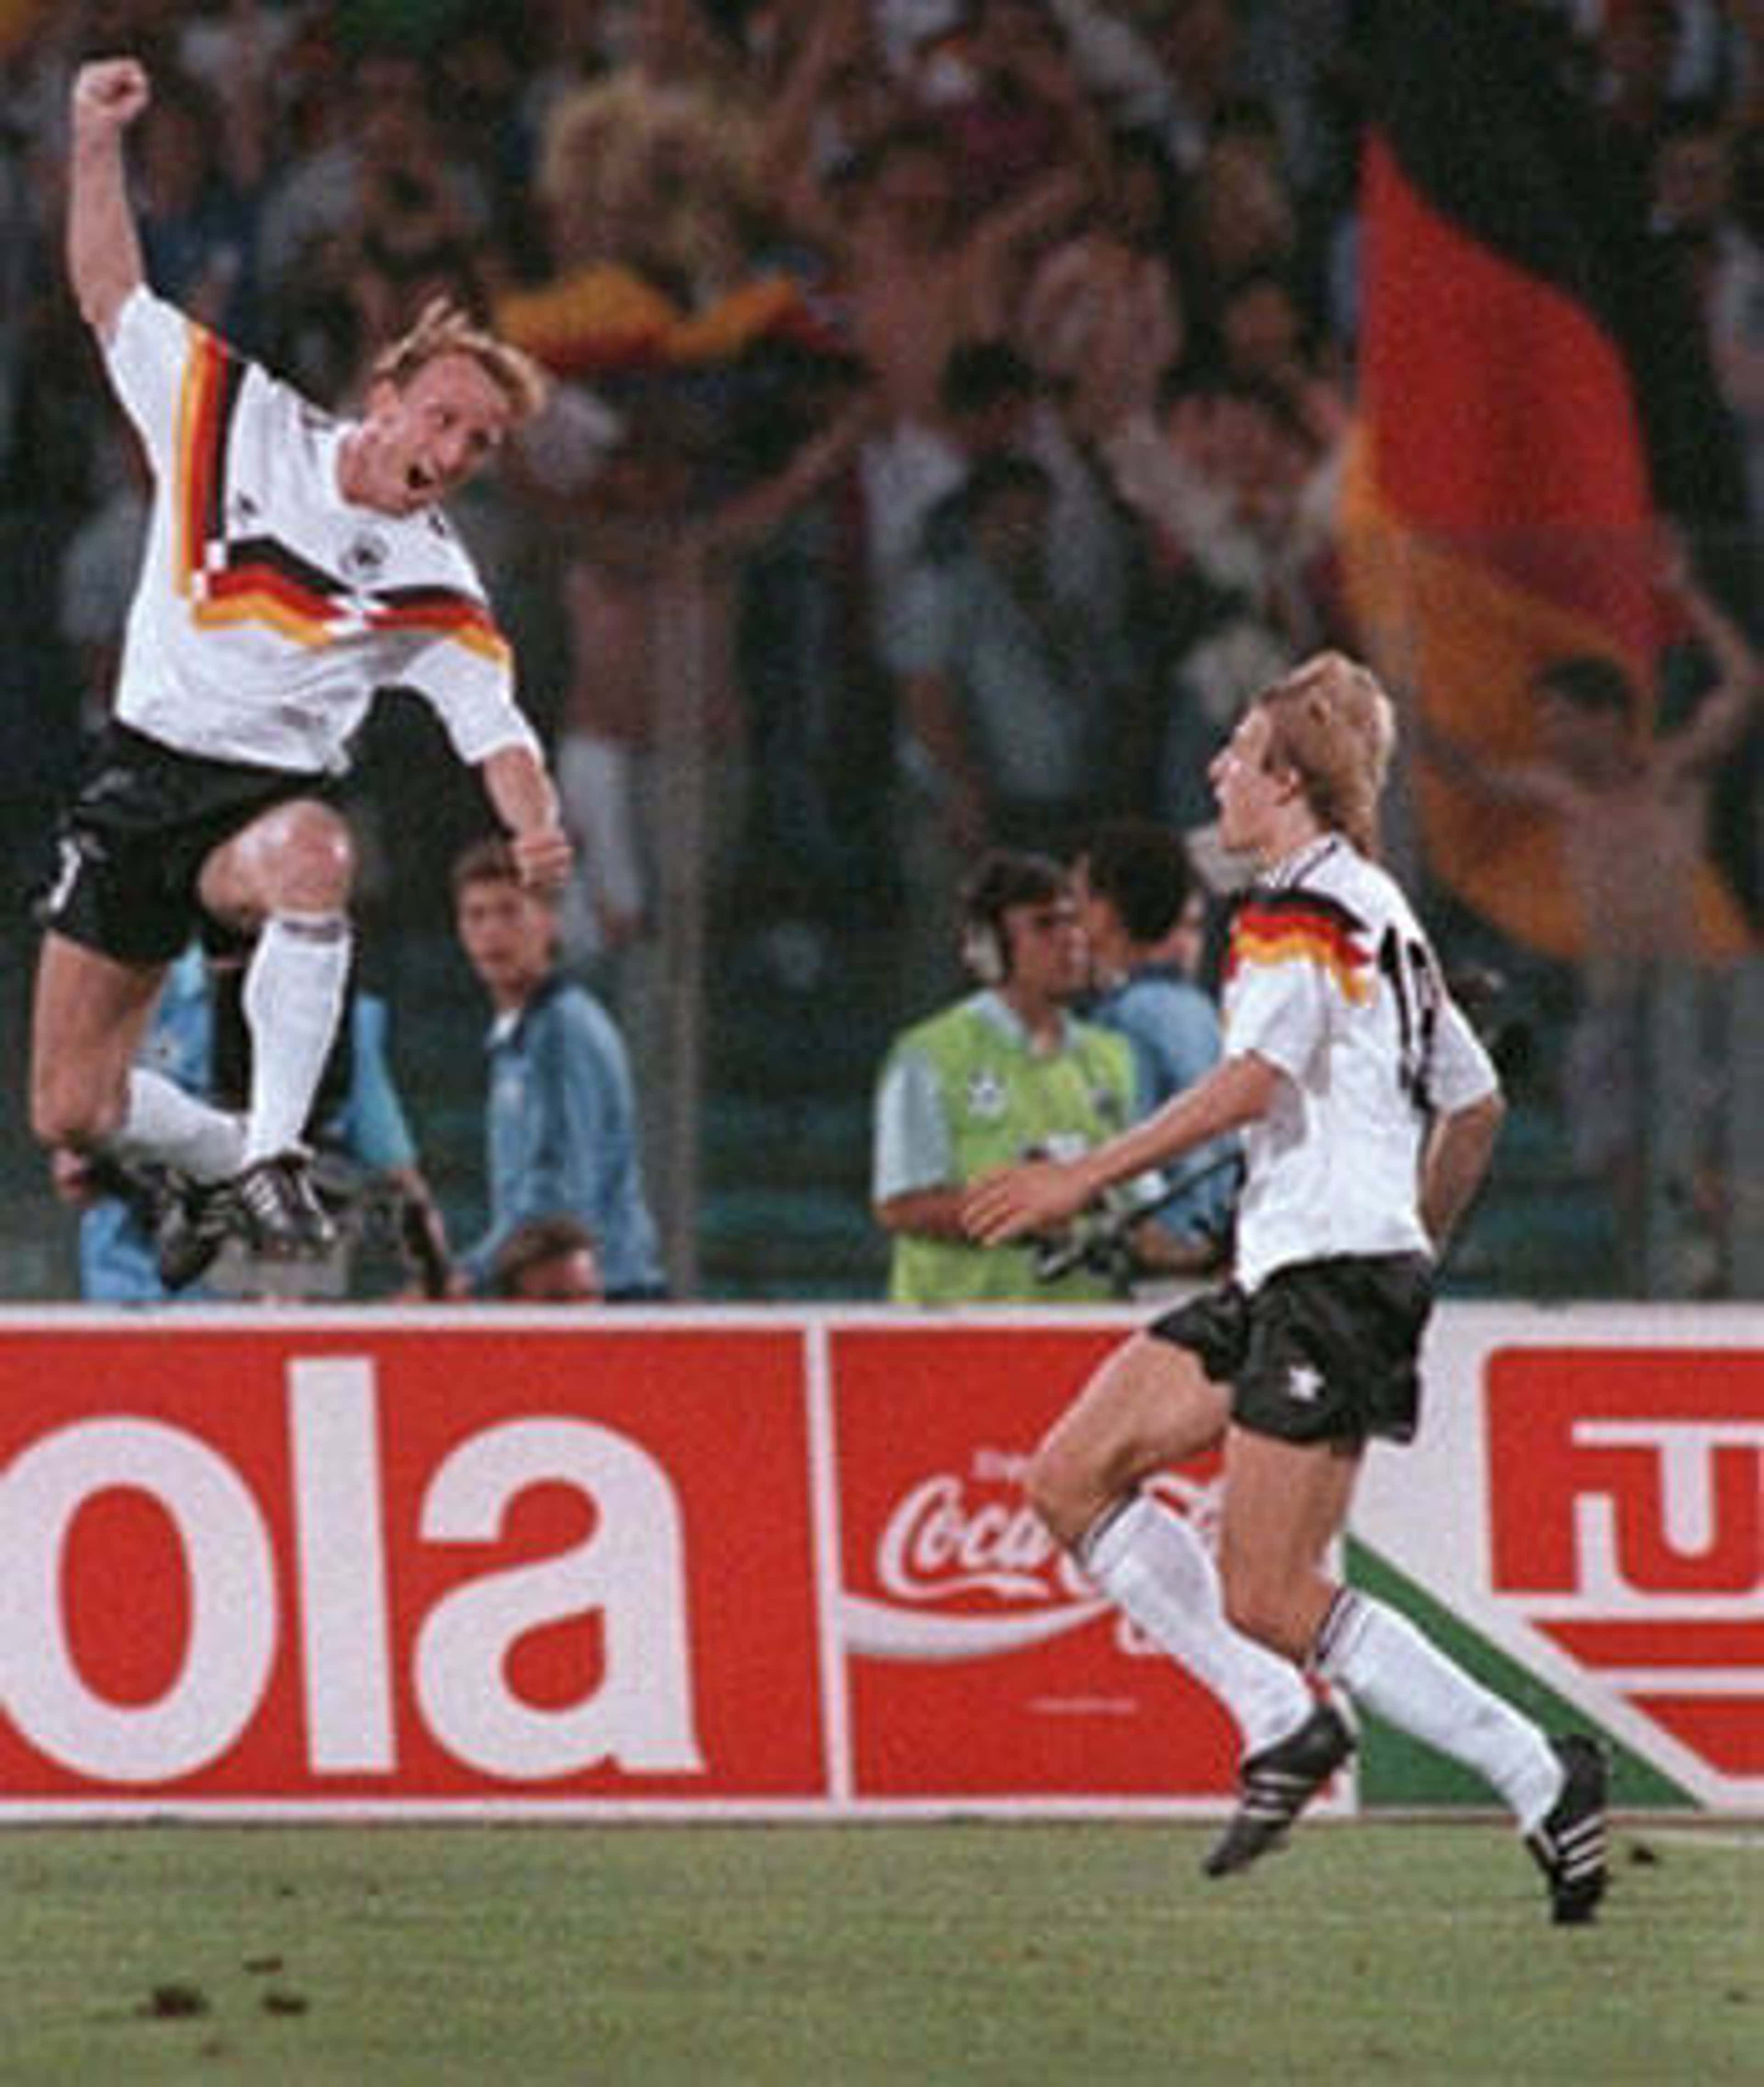 Soccer - World Cup Italia 90 - Group Stage - West Germany v